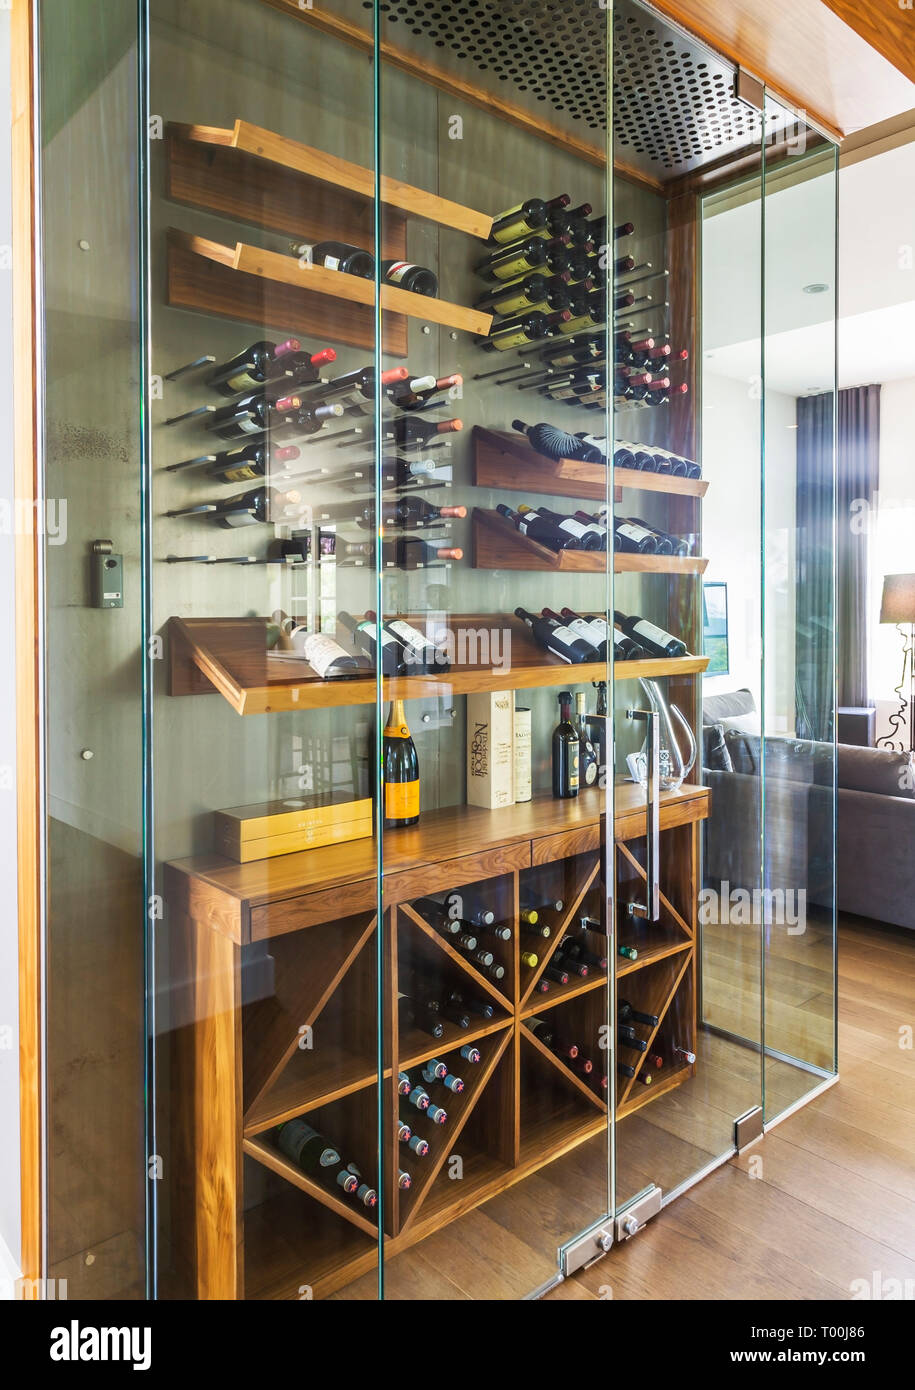 Clear glass constructed wine cellar with wooden shelves and racks filled with bottles inside a luxurious contemporary bungalow style home Stock Photo